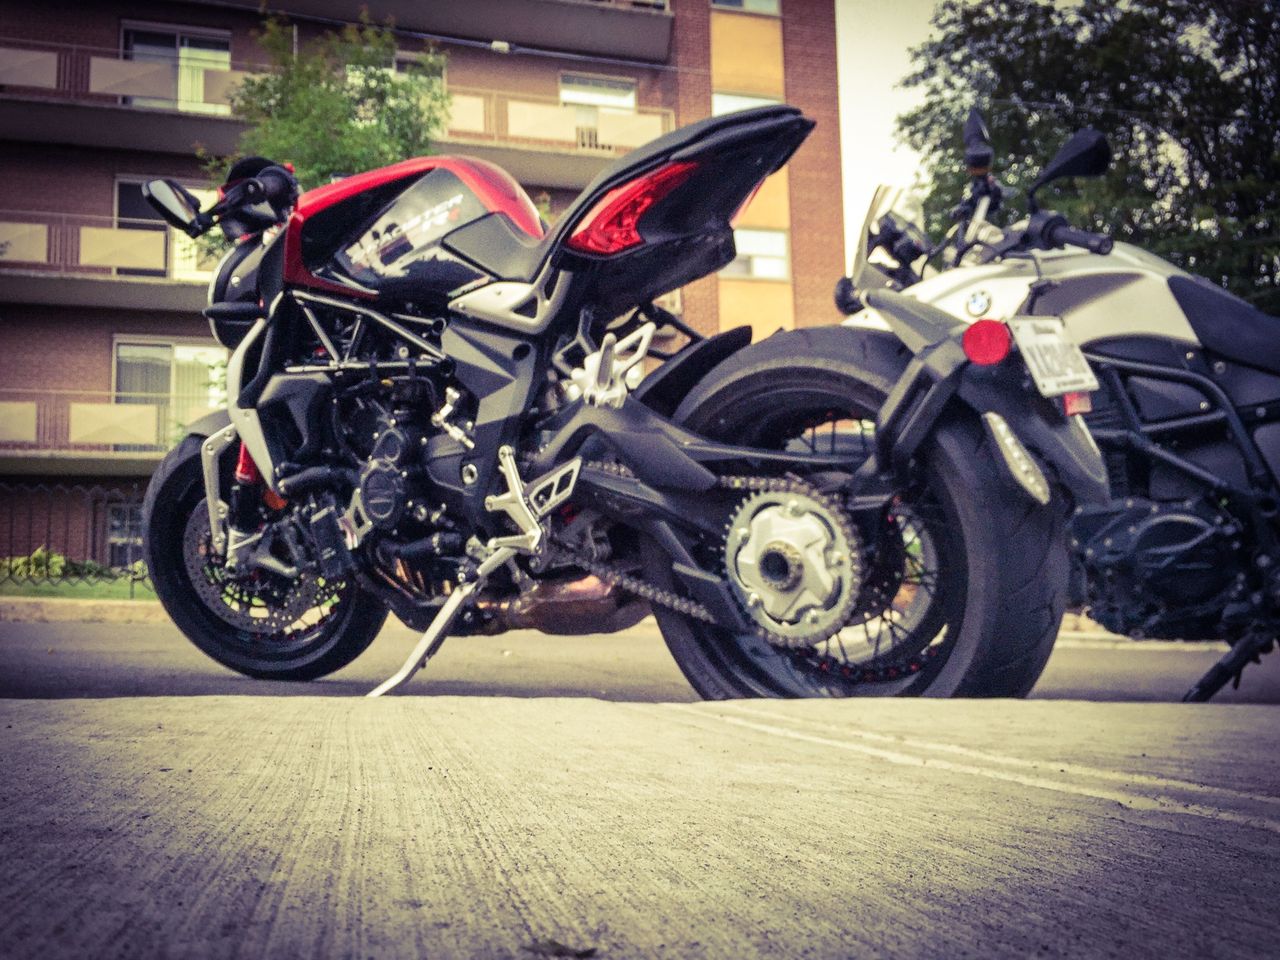 "litre-bike power with the agility of a 600cc naked sport"